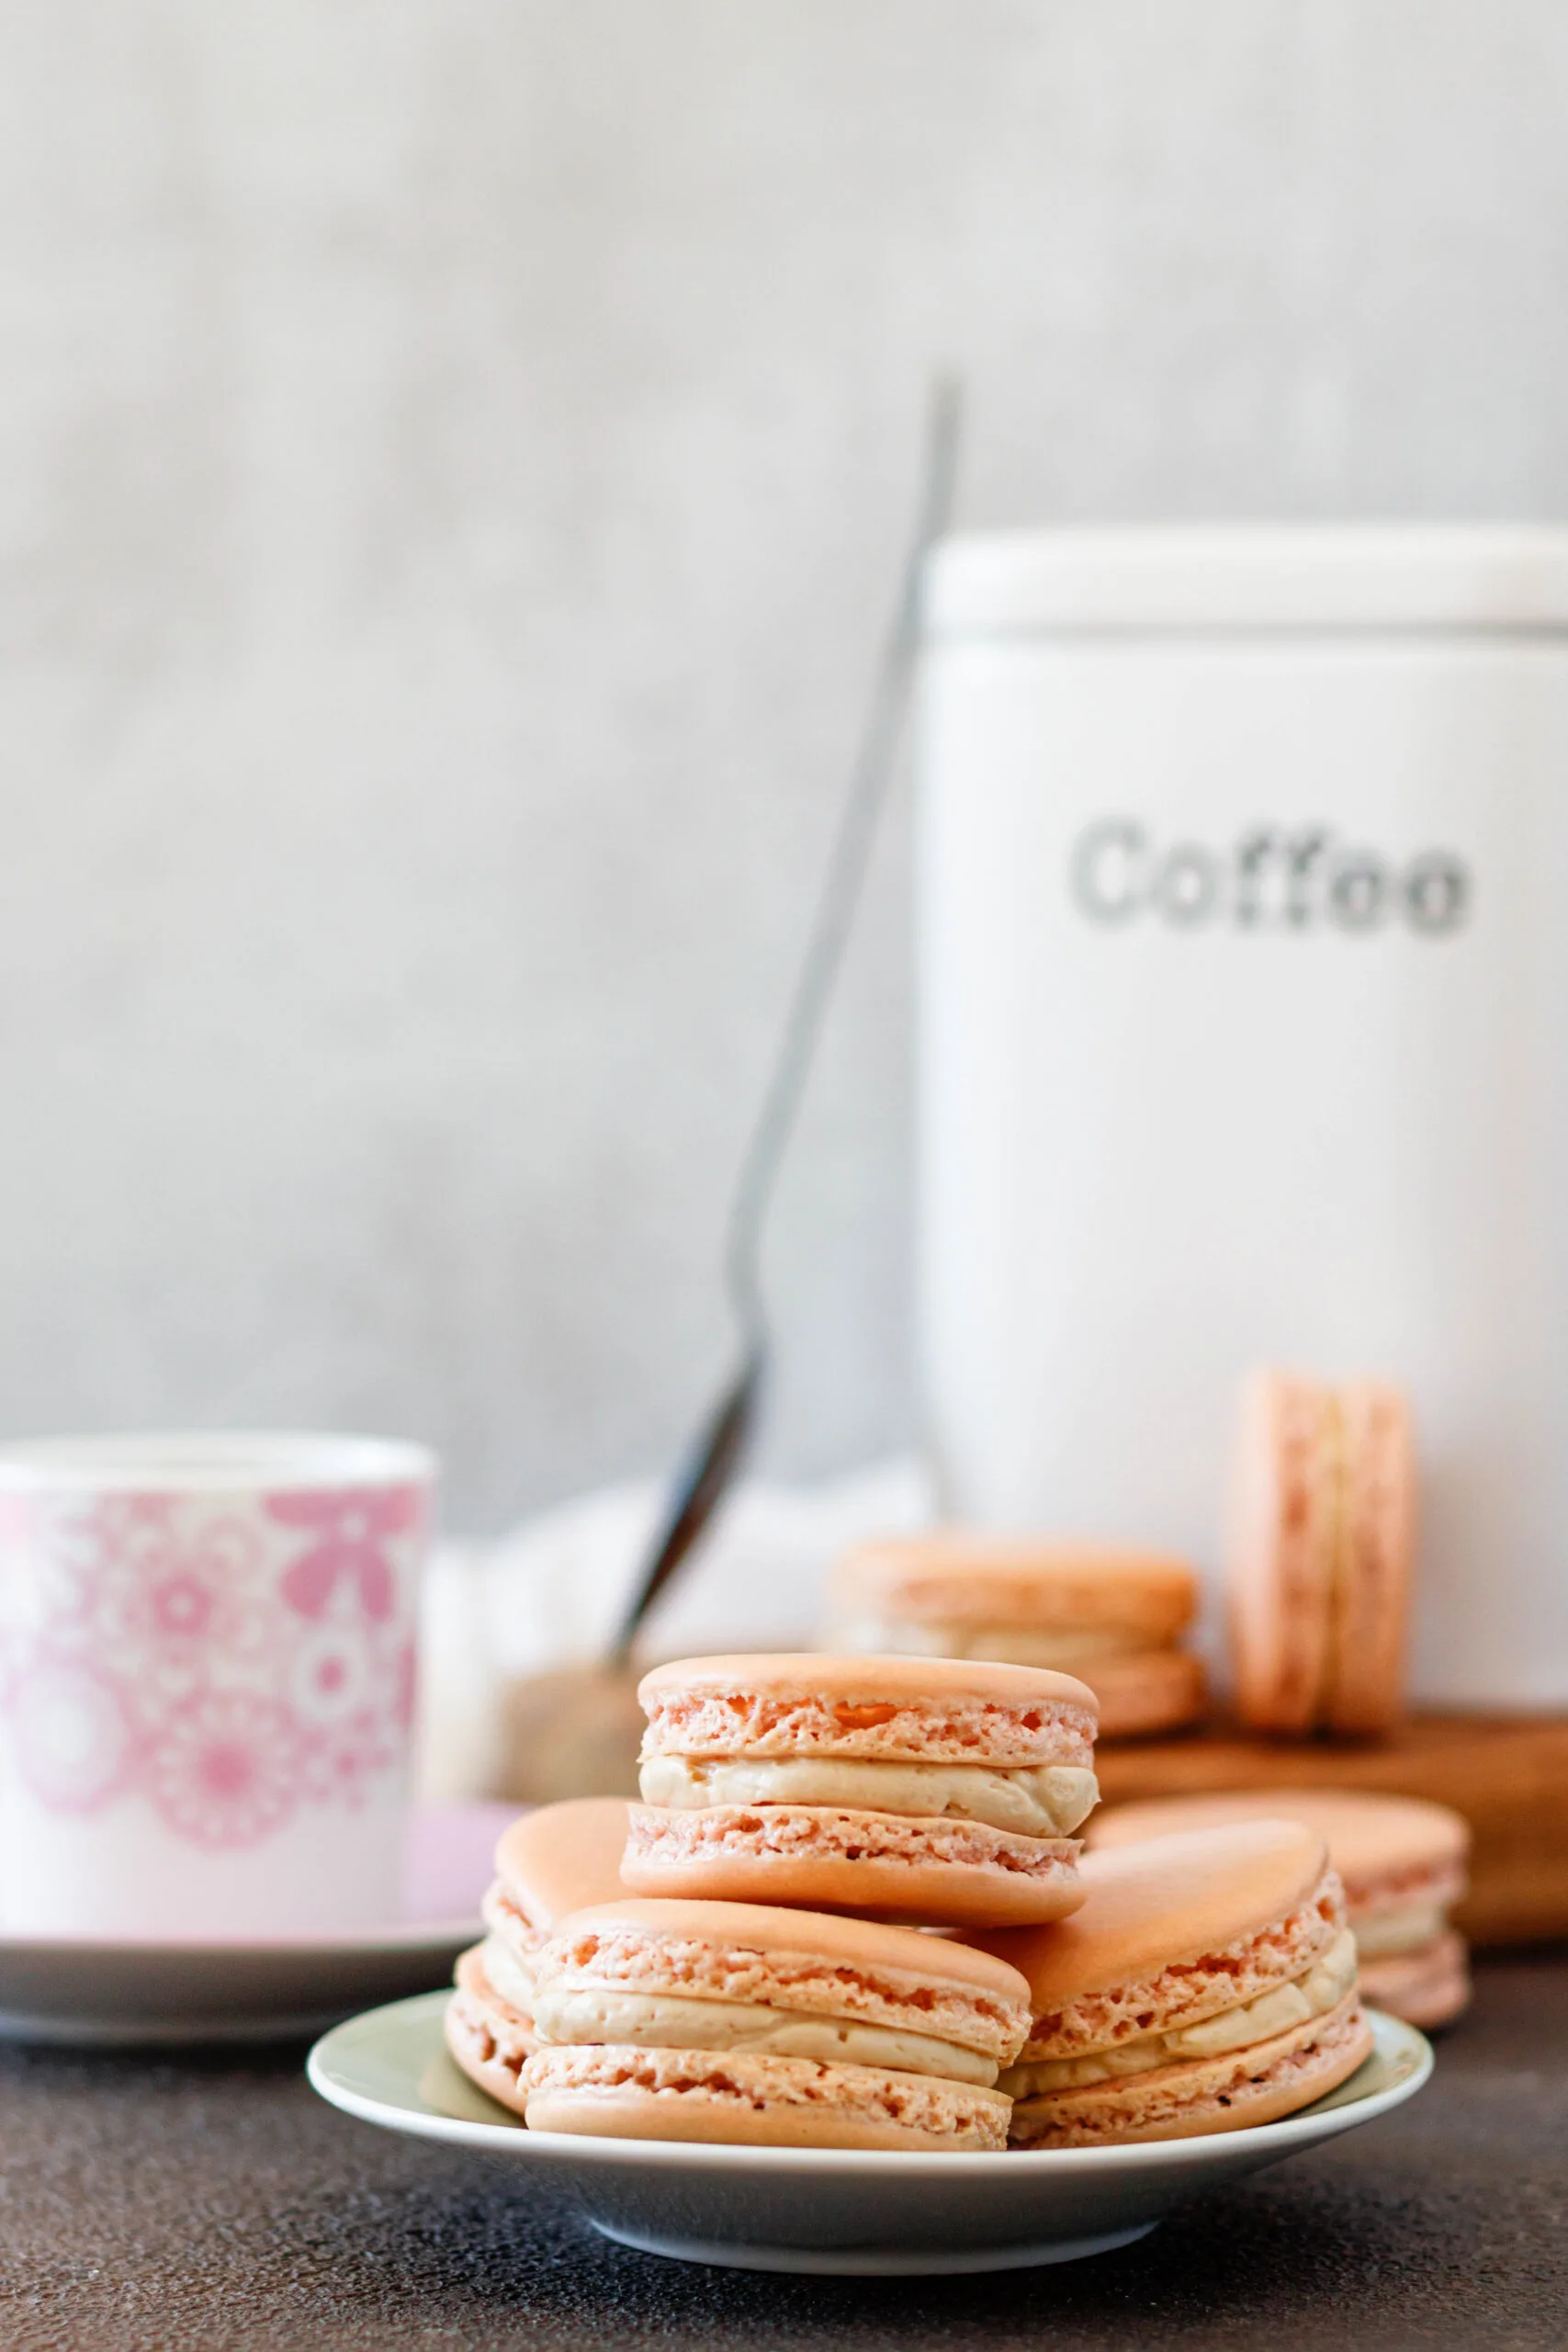 macarons on a serving plate with a cannister of coffee in the background